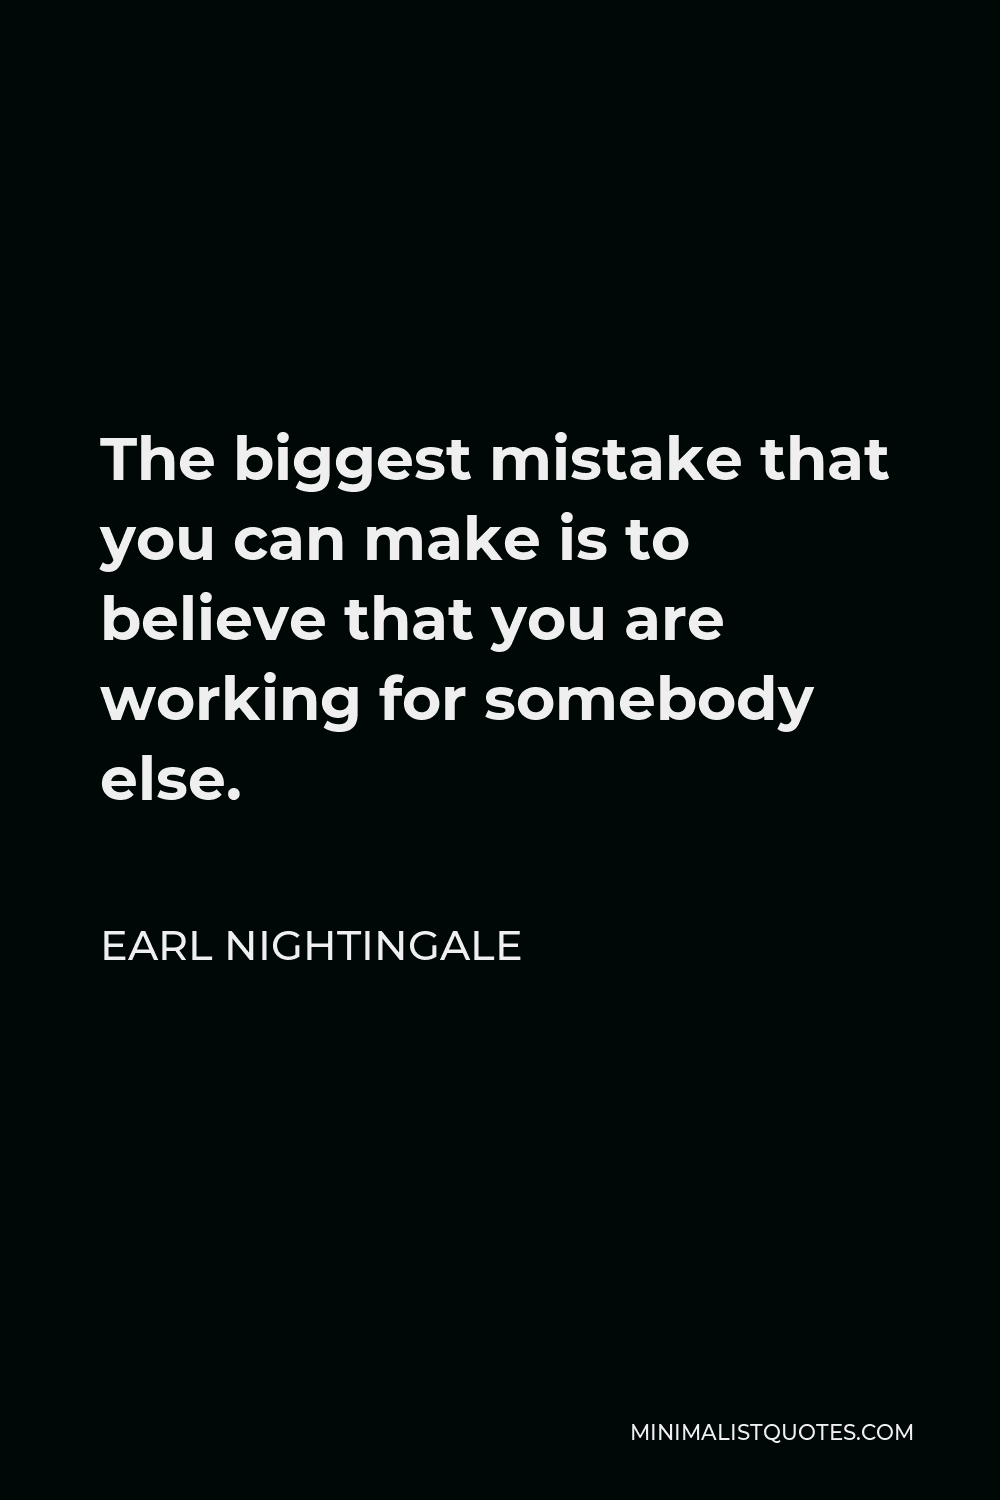 Earl Nightingale Quote - The biggest mistake that you can make is to believe that you are working for somebody else.